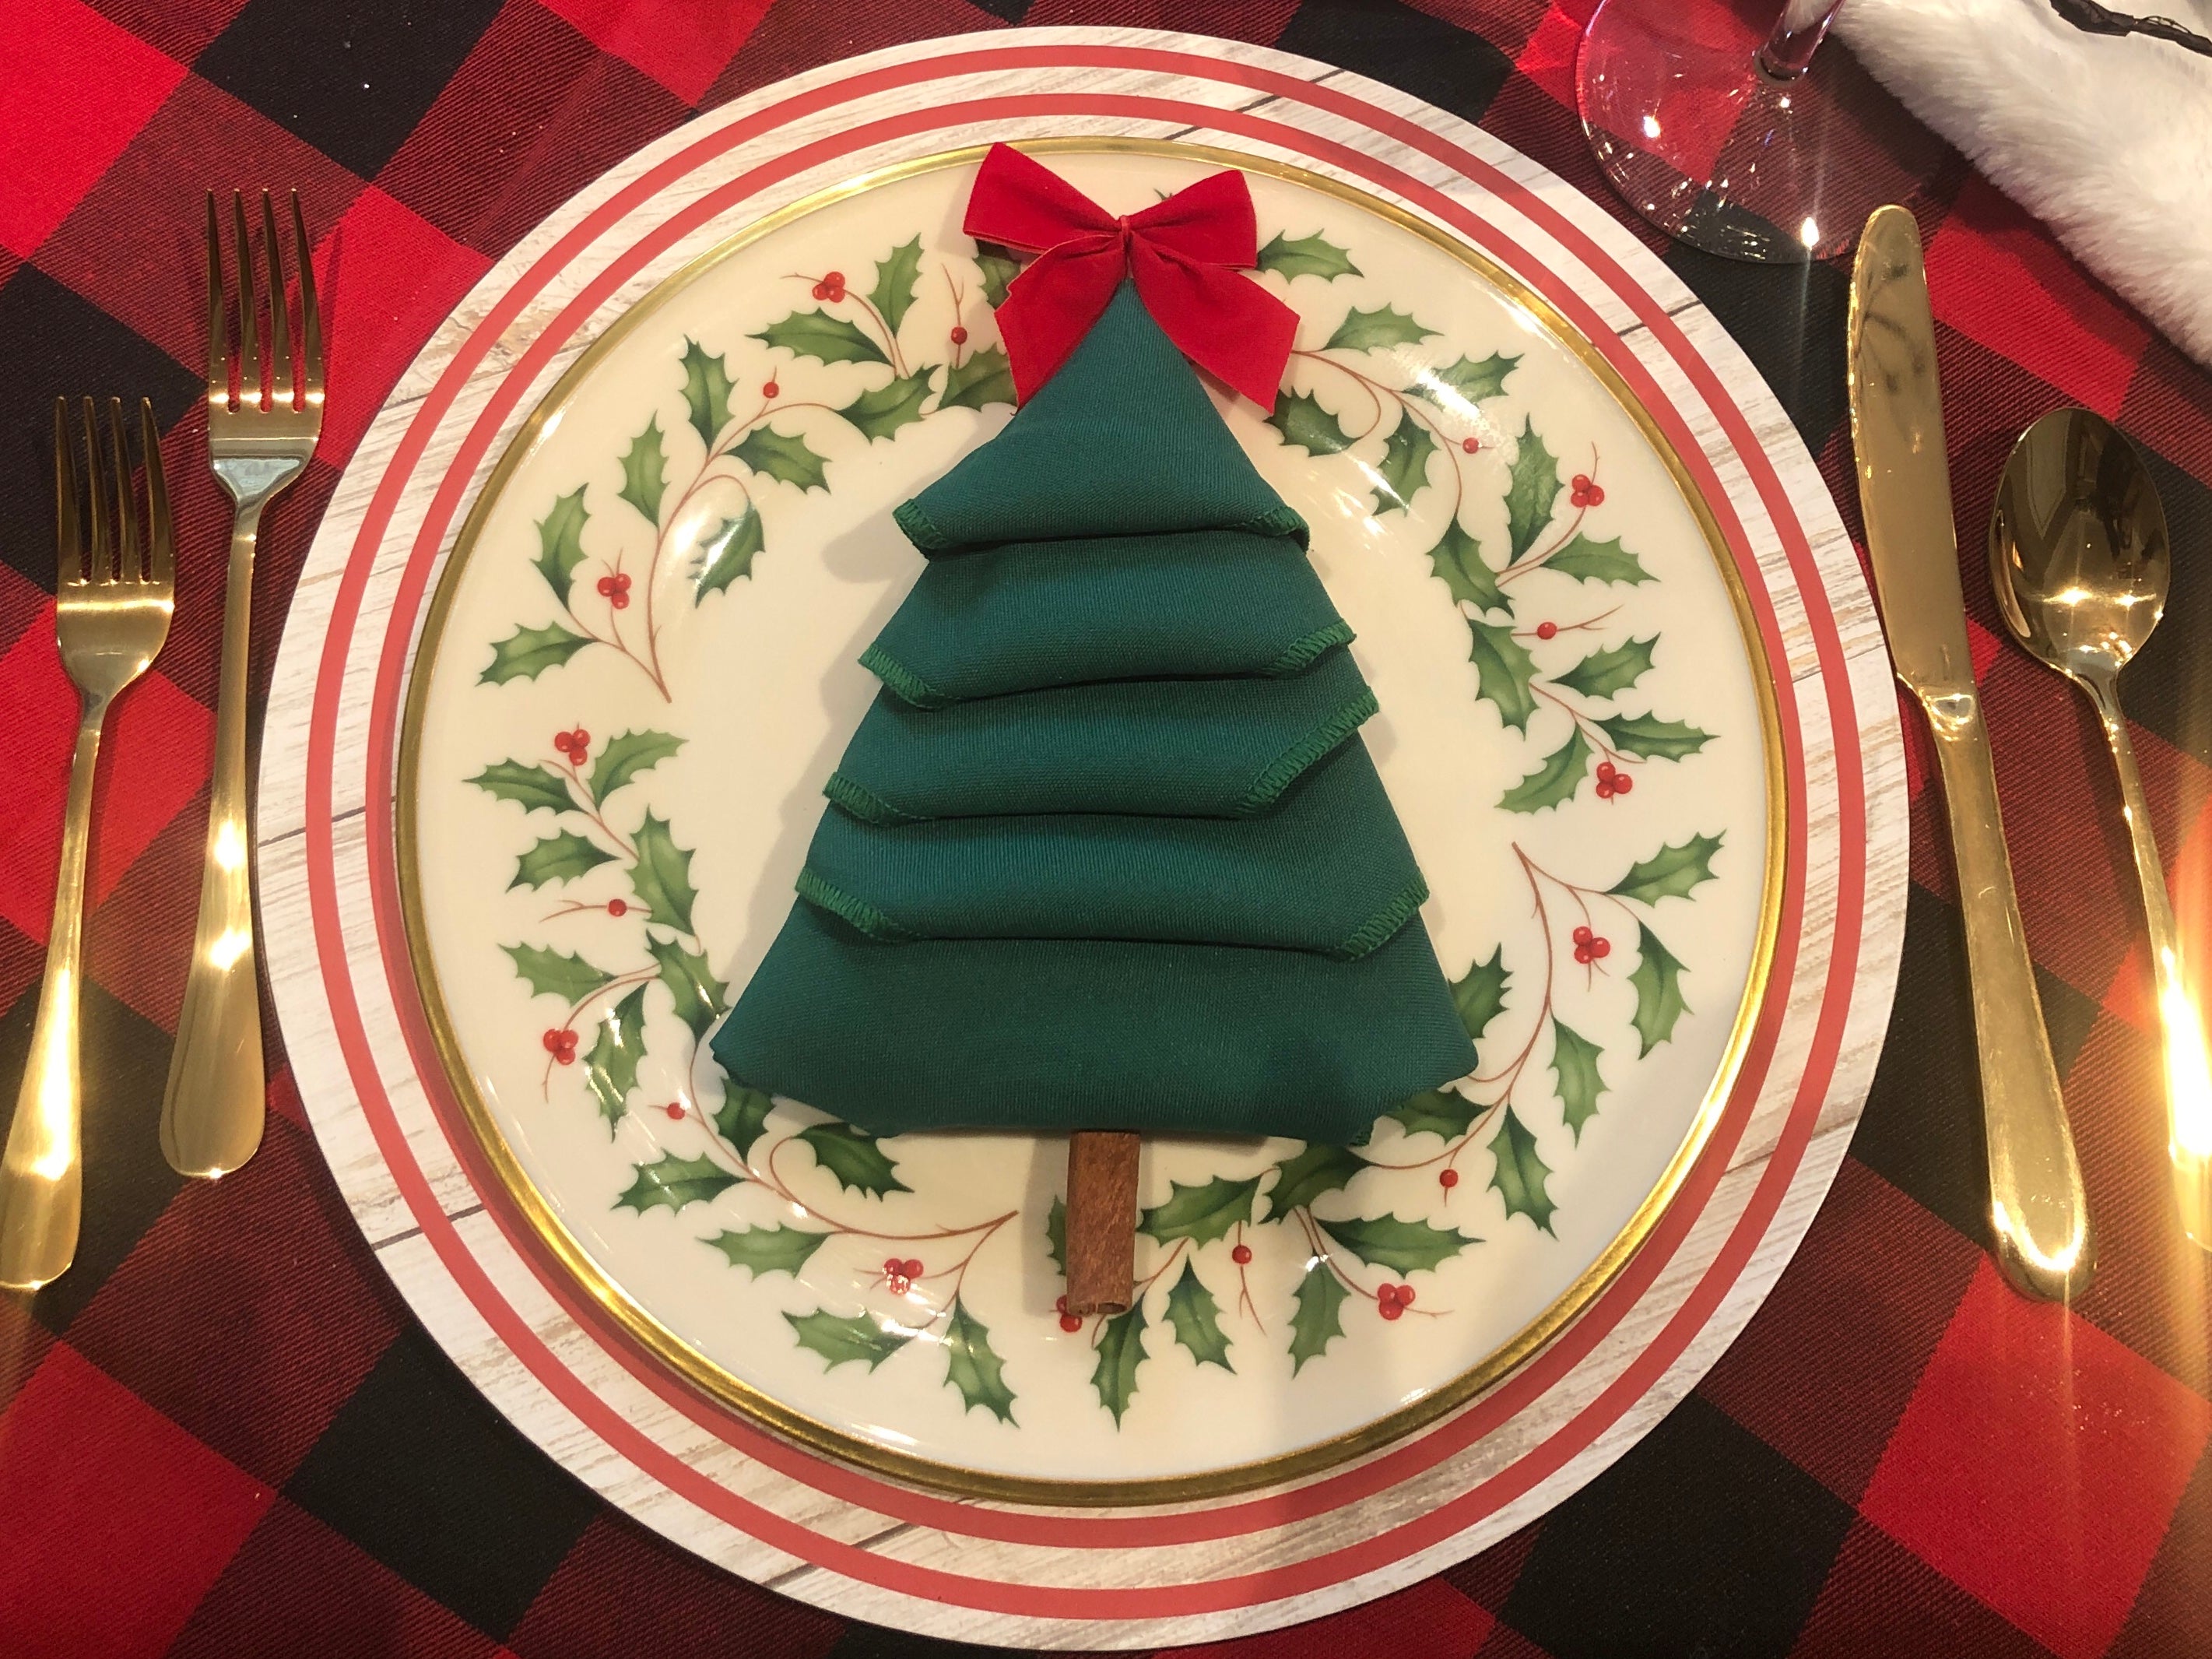 Christmas Tree Napkin Folding – The Curated Table